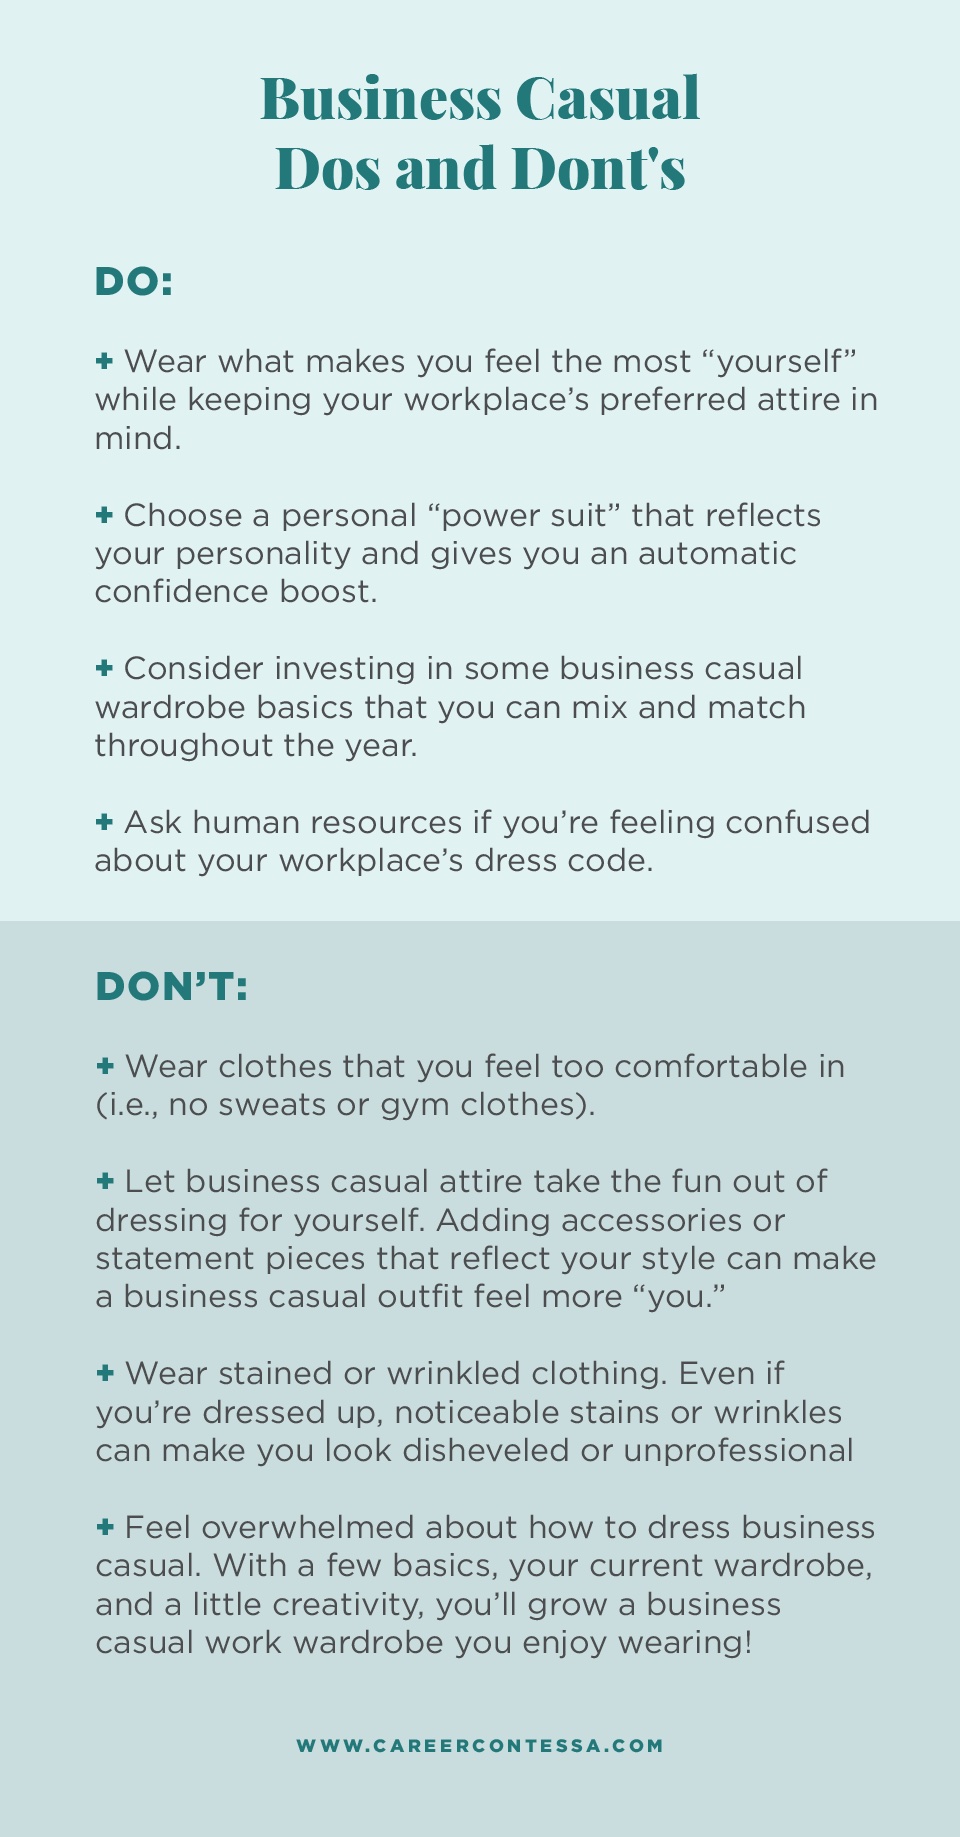 What Is Business Casual for Women?, On Careers